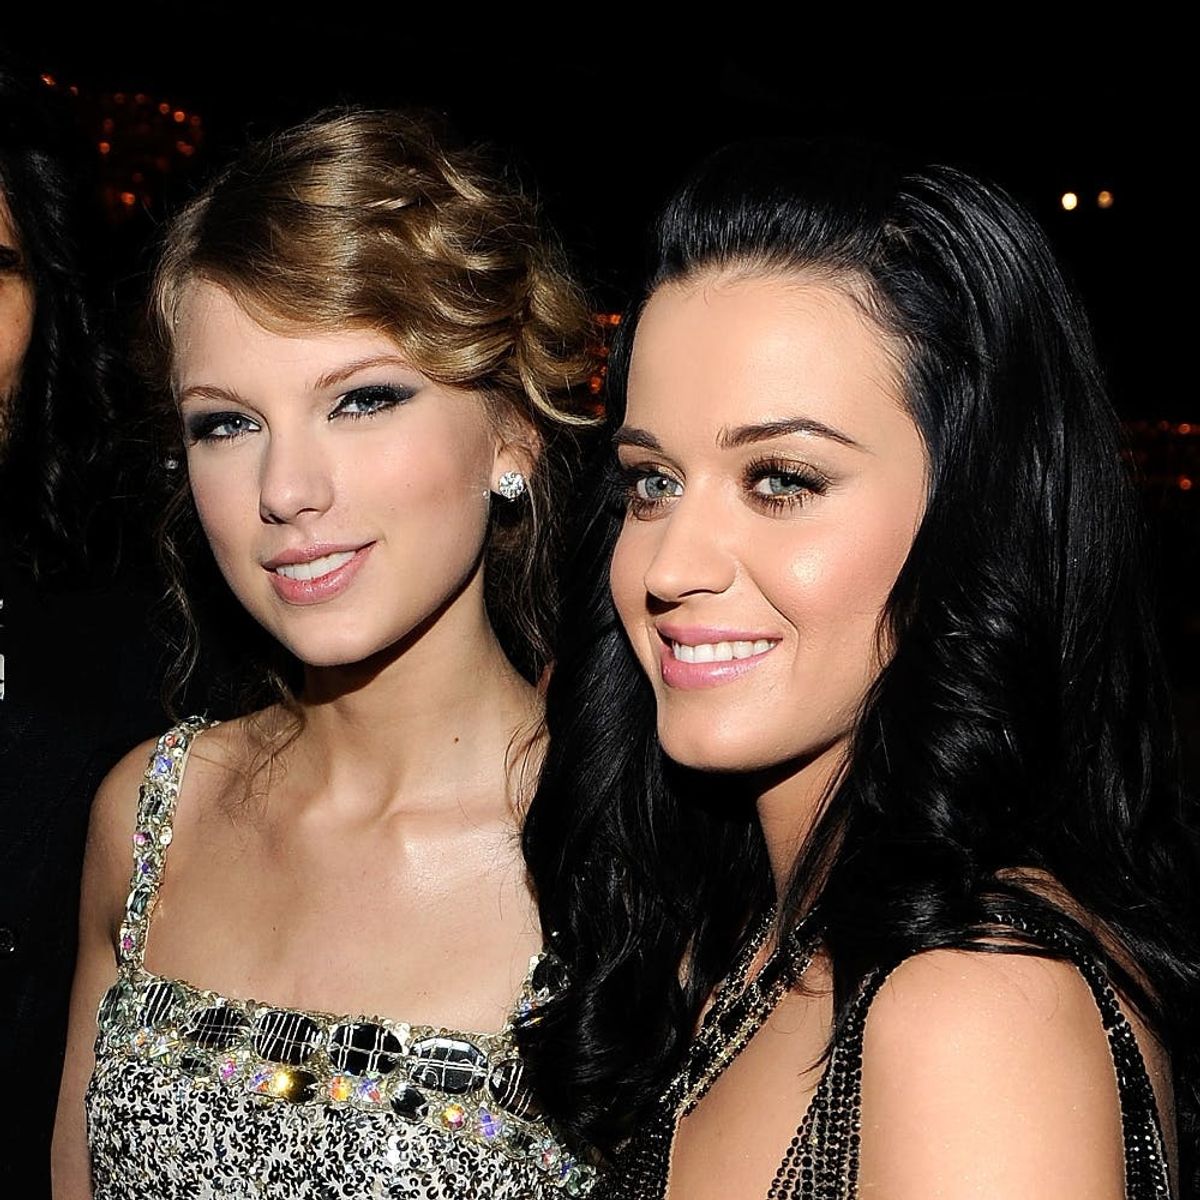 Katy Perry Has Finally Spilled ALL of the Deets About Her Taylor Swift Feud